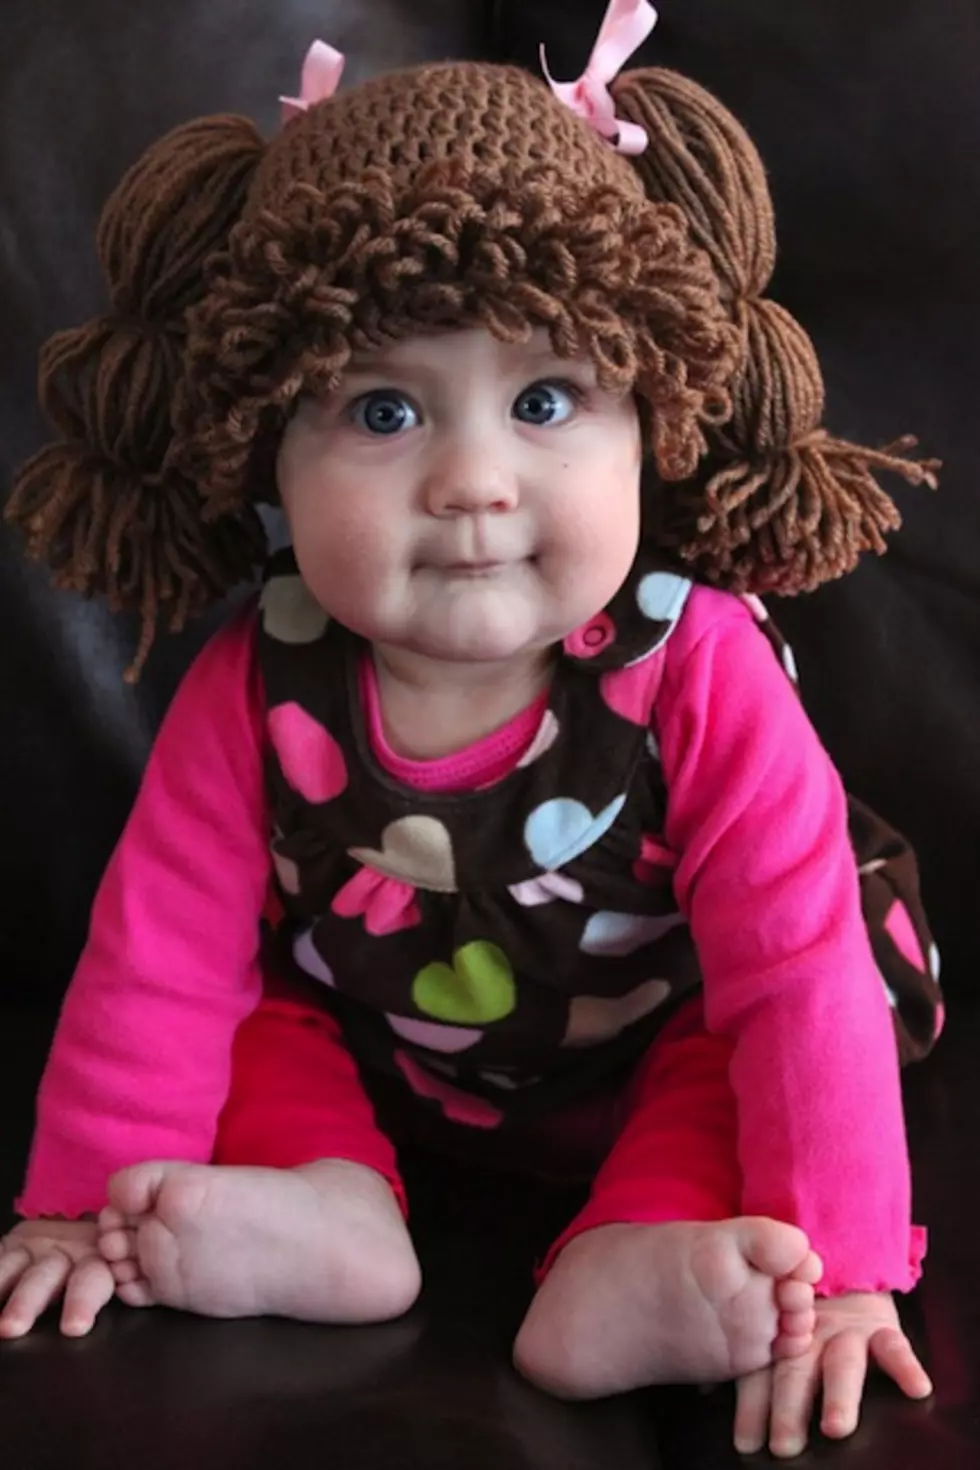 You Can Buy Your Kid a Special Wig to Make Them Look Like a Cabbage Patch Doll